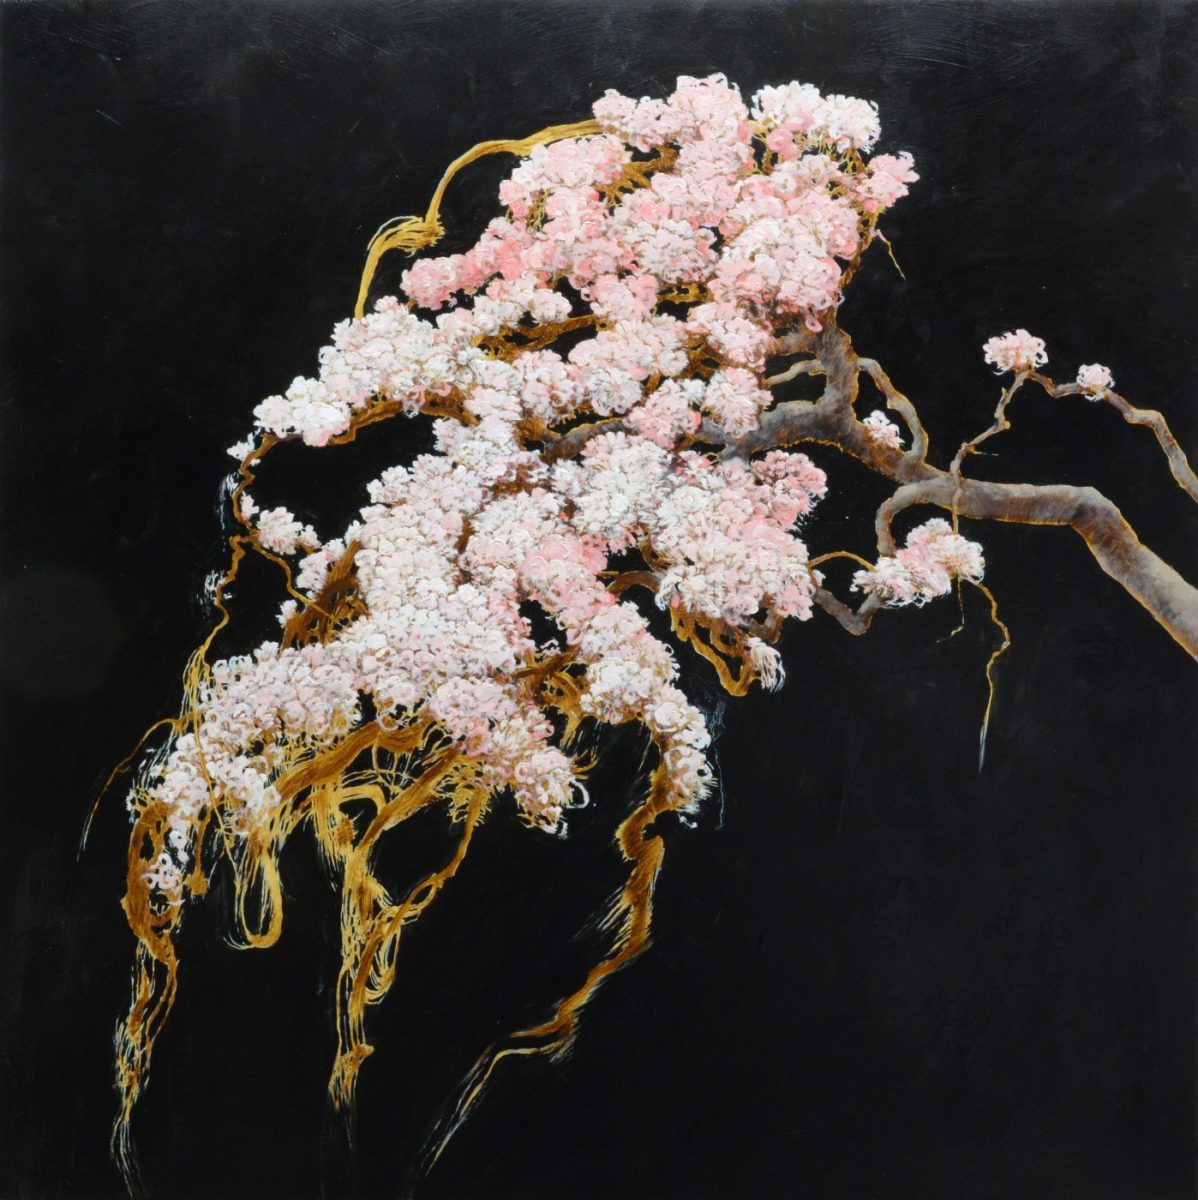 Night Blooms painting by Robert Marchessault